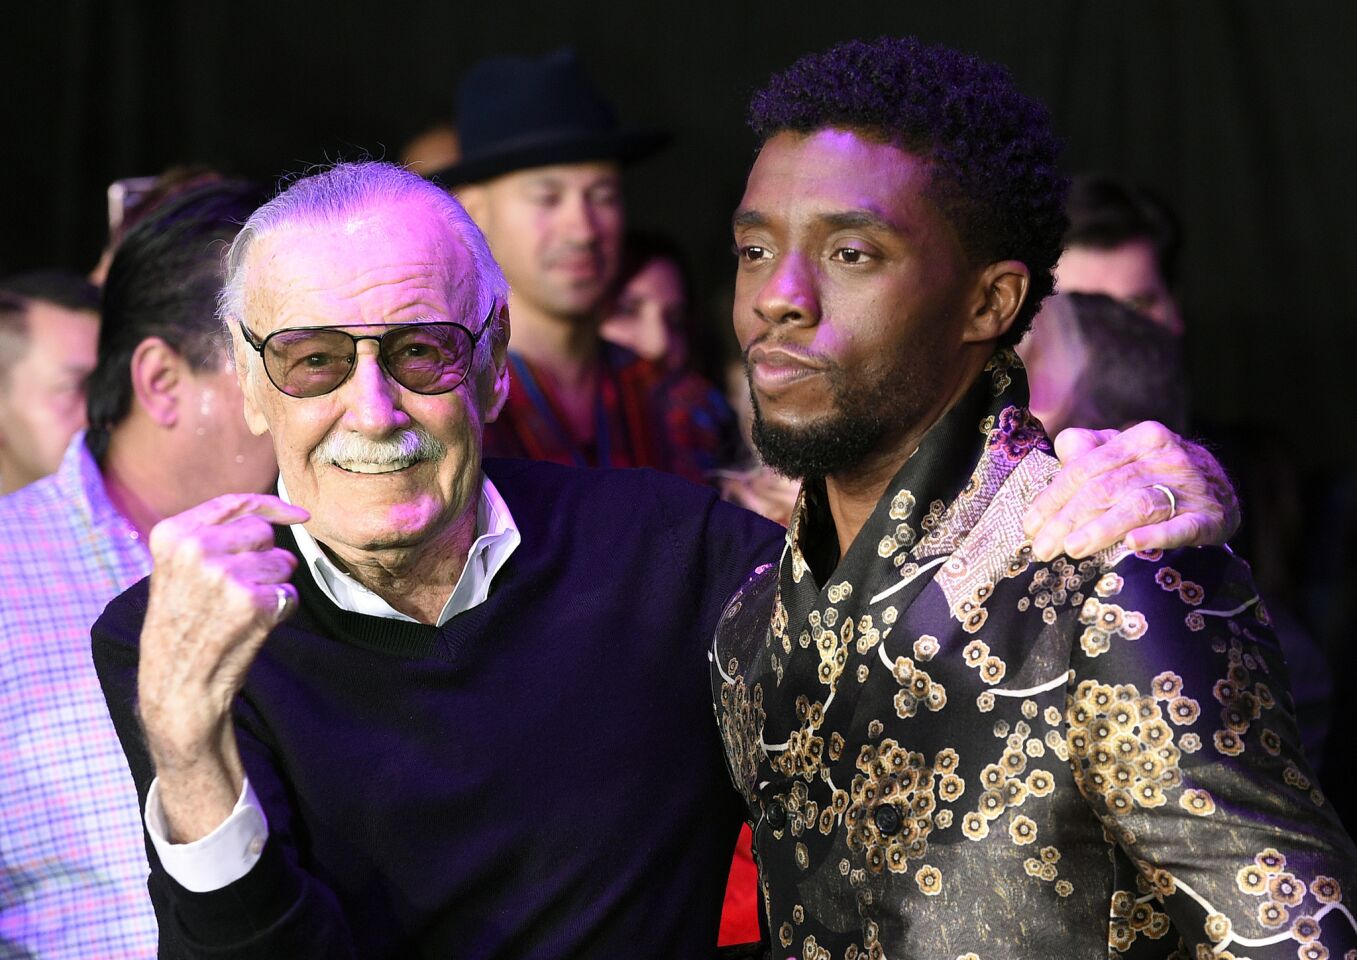 Comic book legend Stan Lee, left, co-creator of the Black Panther superhero, poses with Chadwick Boseman at the "Black Panther" premiere on Jan. 29, 2018, in Los Angeles.